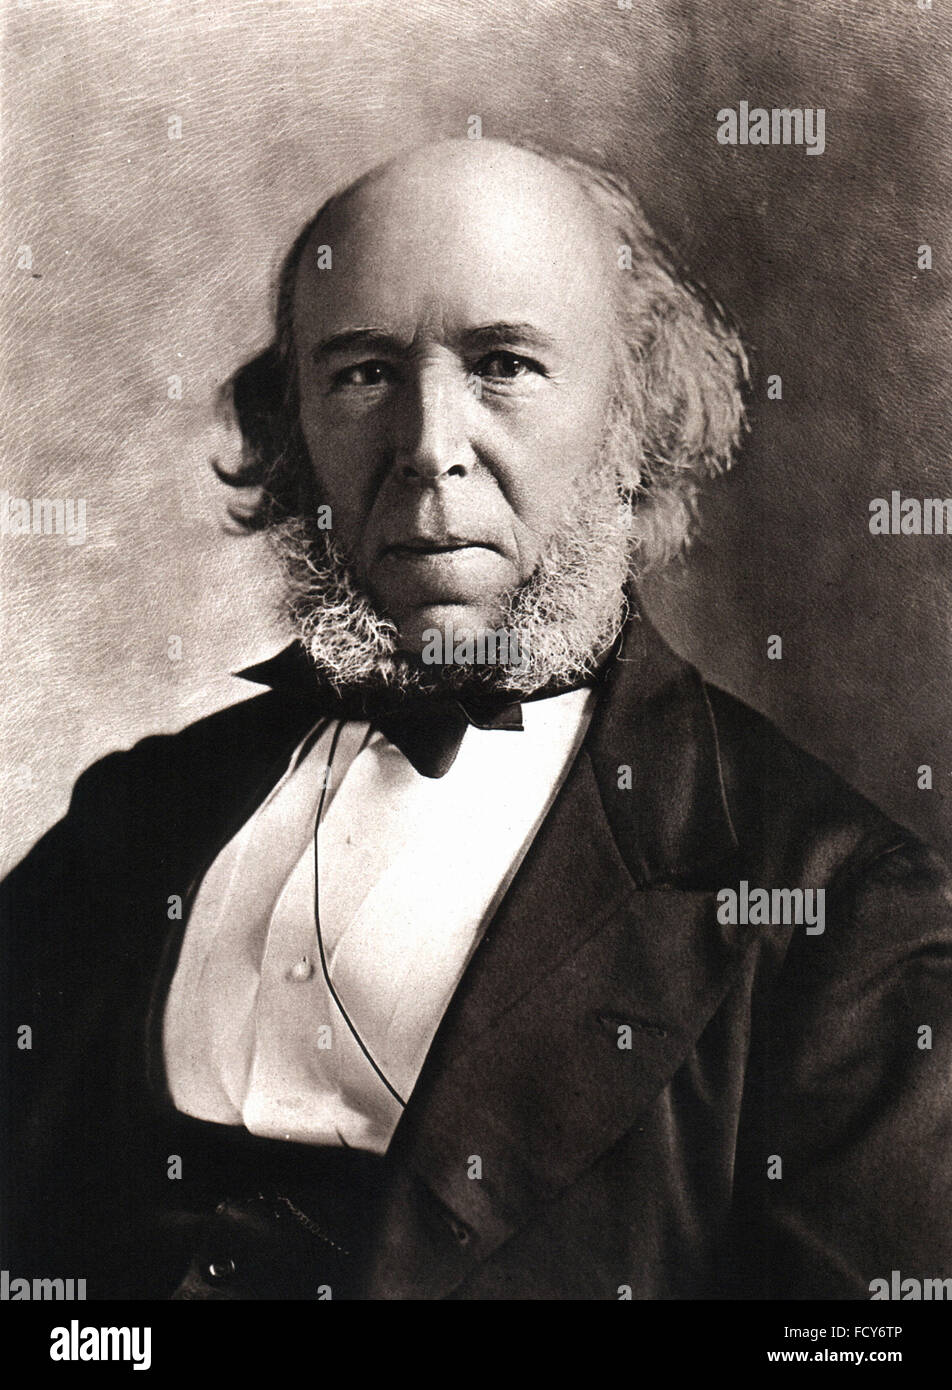 portrait of herbert spencer 1820 1903 physicist and biologist Stock Photo